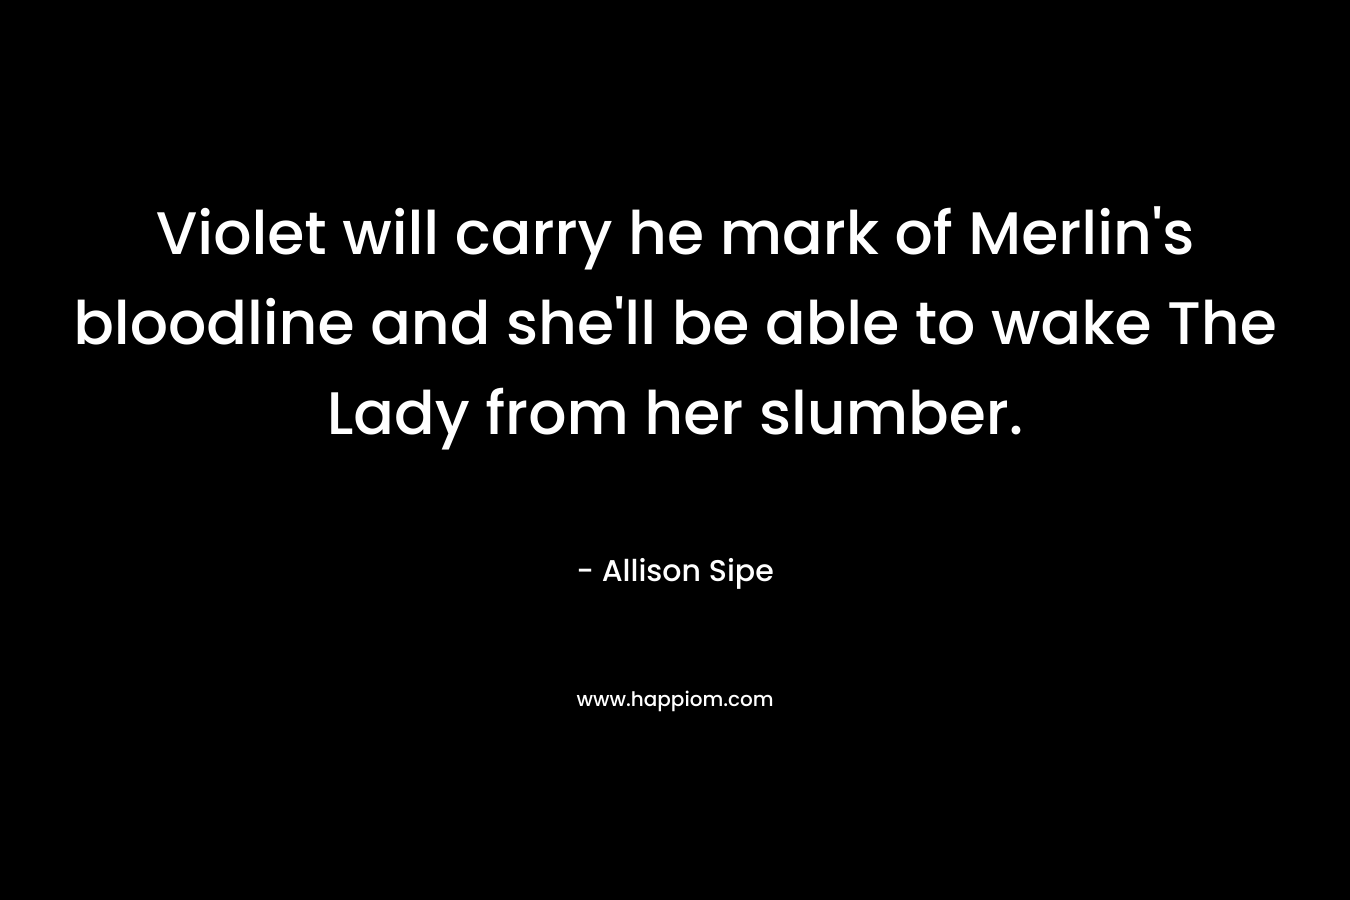 Violet will carry he mark of Merlin’s bloodline and she’ll be able to wake The Lady from her slumber. – Allison Sipe